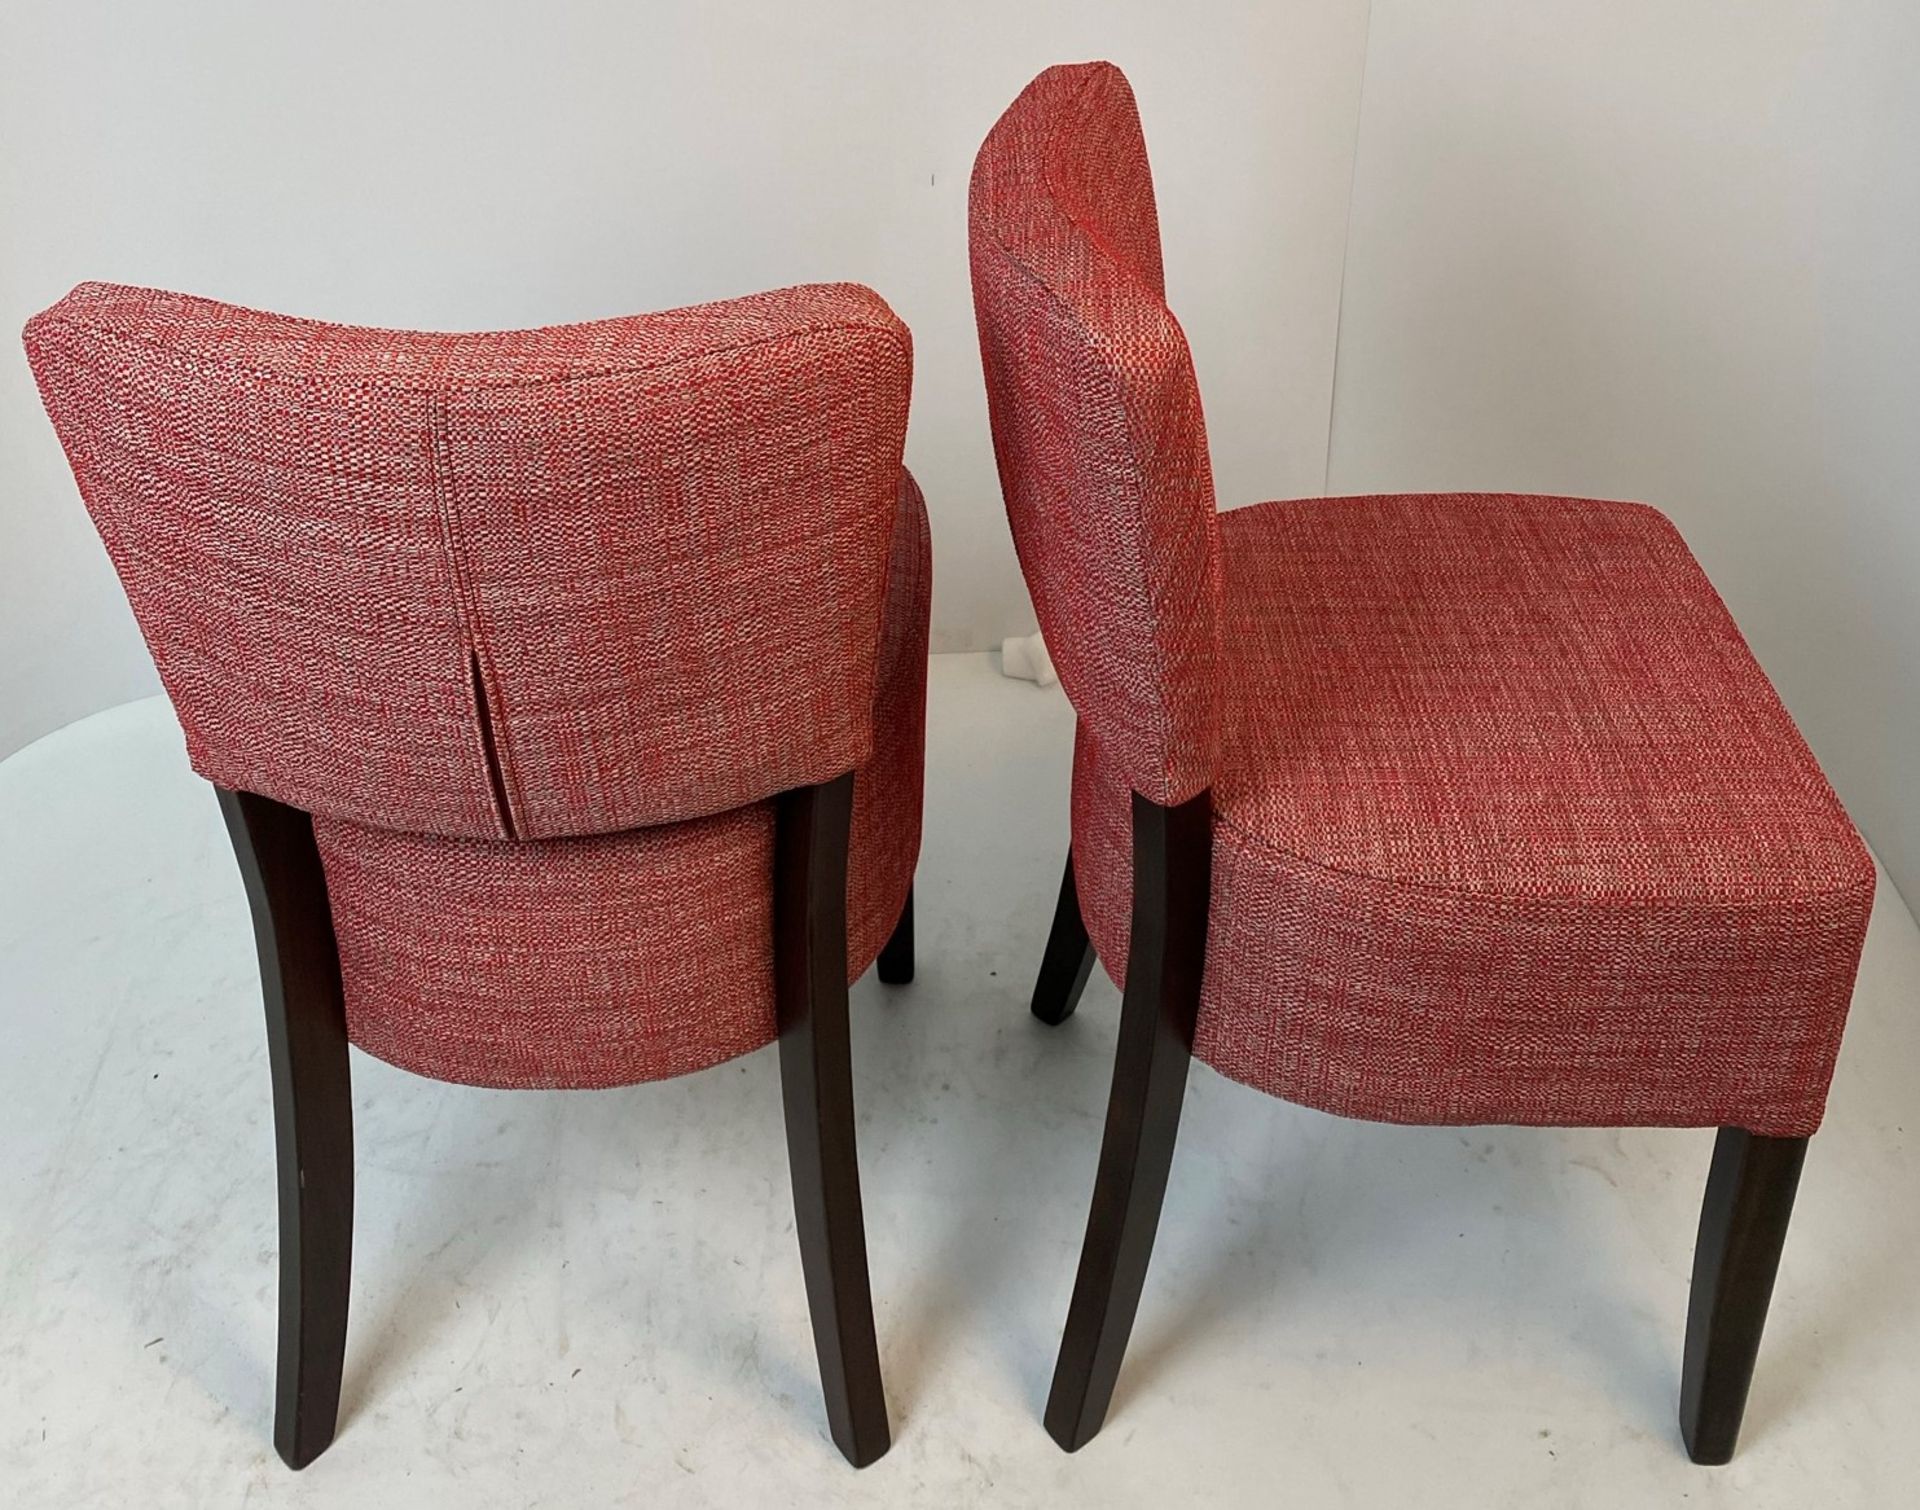 2 x Memphis Sekers Byblos 17 Garnet side/dining chairs with walnut coloured frames - Image 2 of 3